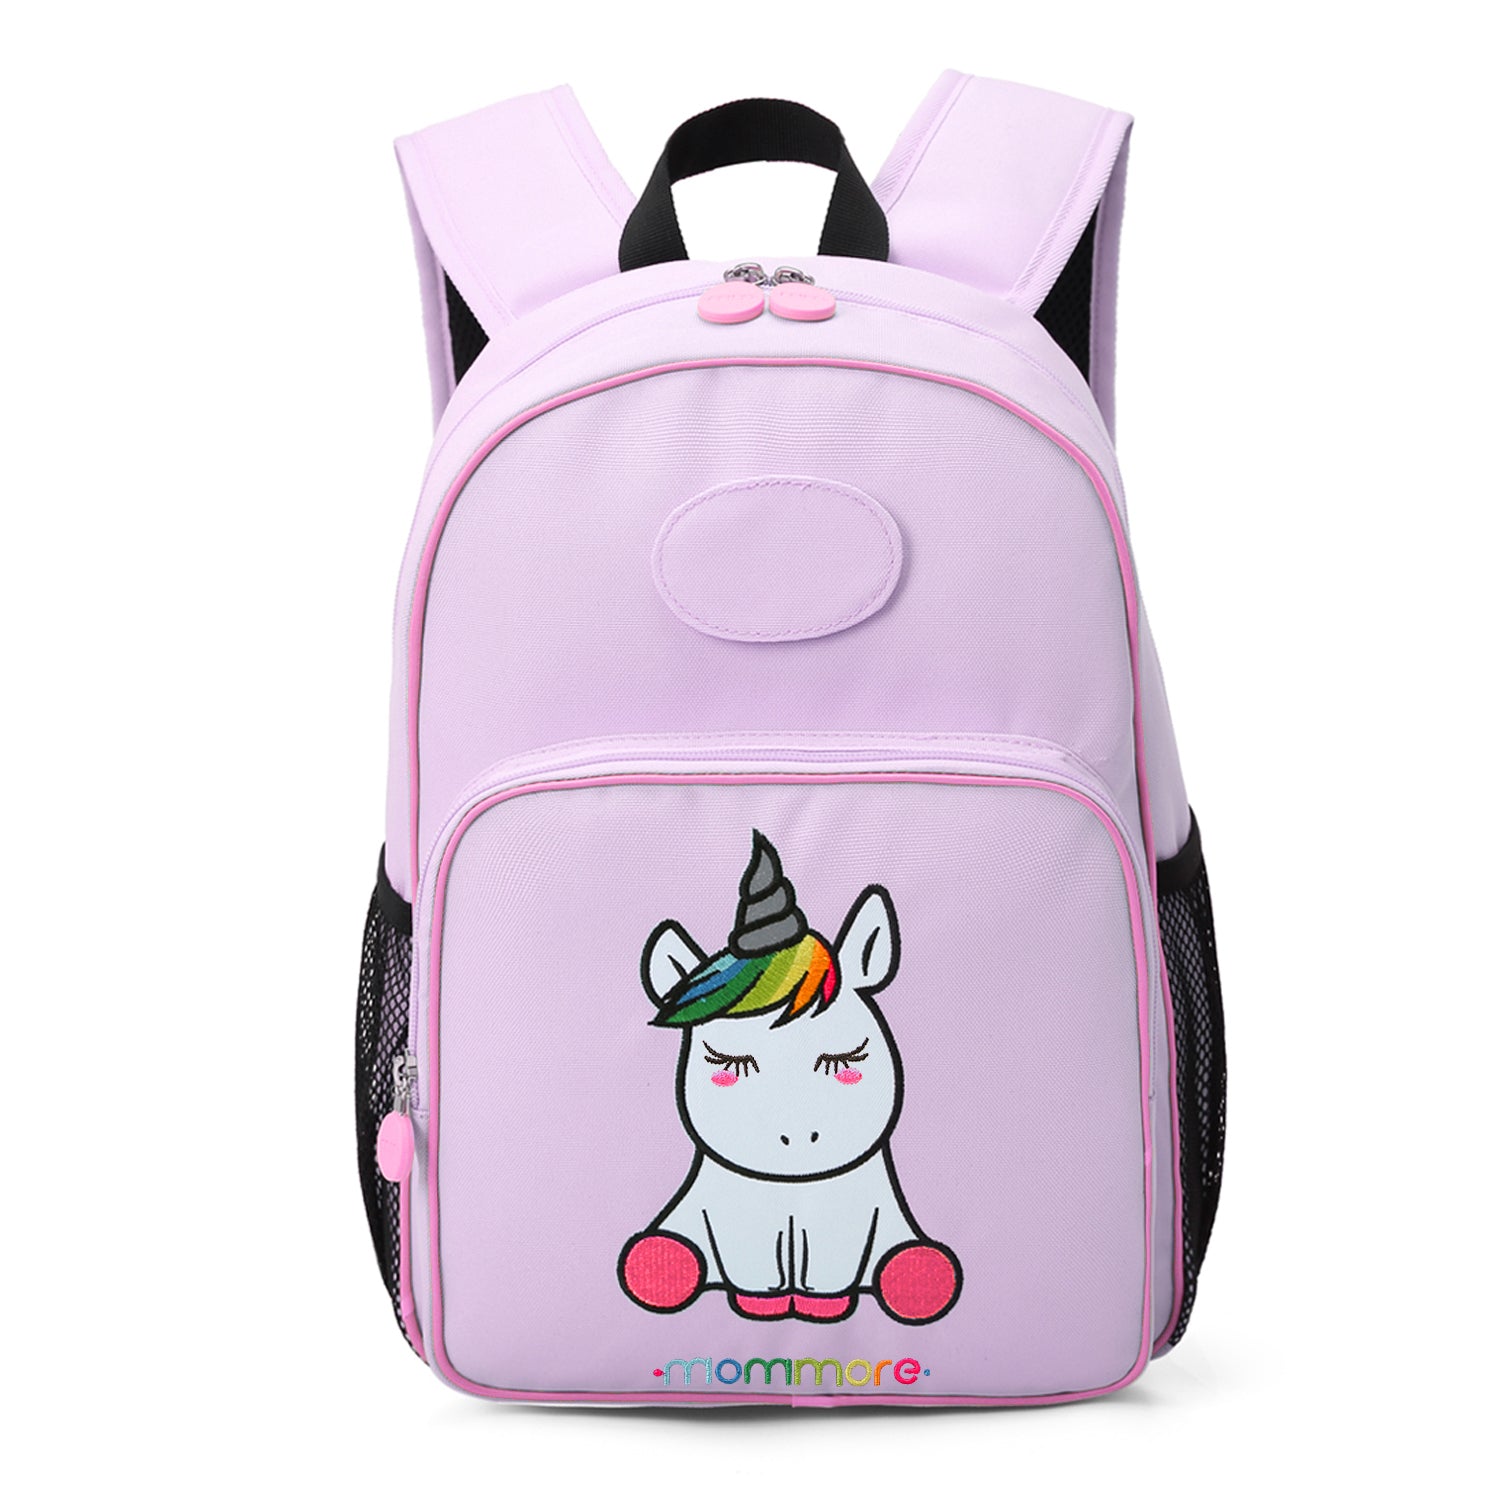 HAPPYSUNNY Toddler Backpack and Lunch Box Set for Girls 2-in-1 Kids Unicorn  Backpack and Insulated Lunch Bag Compartment